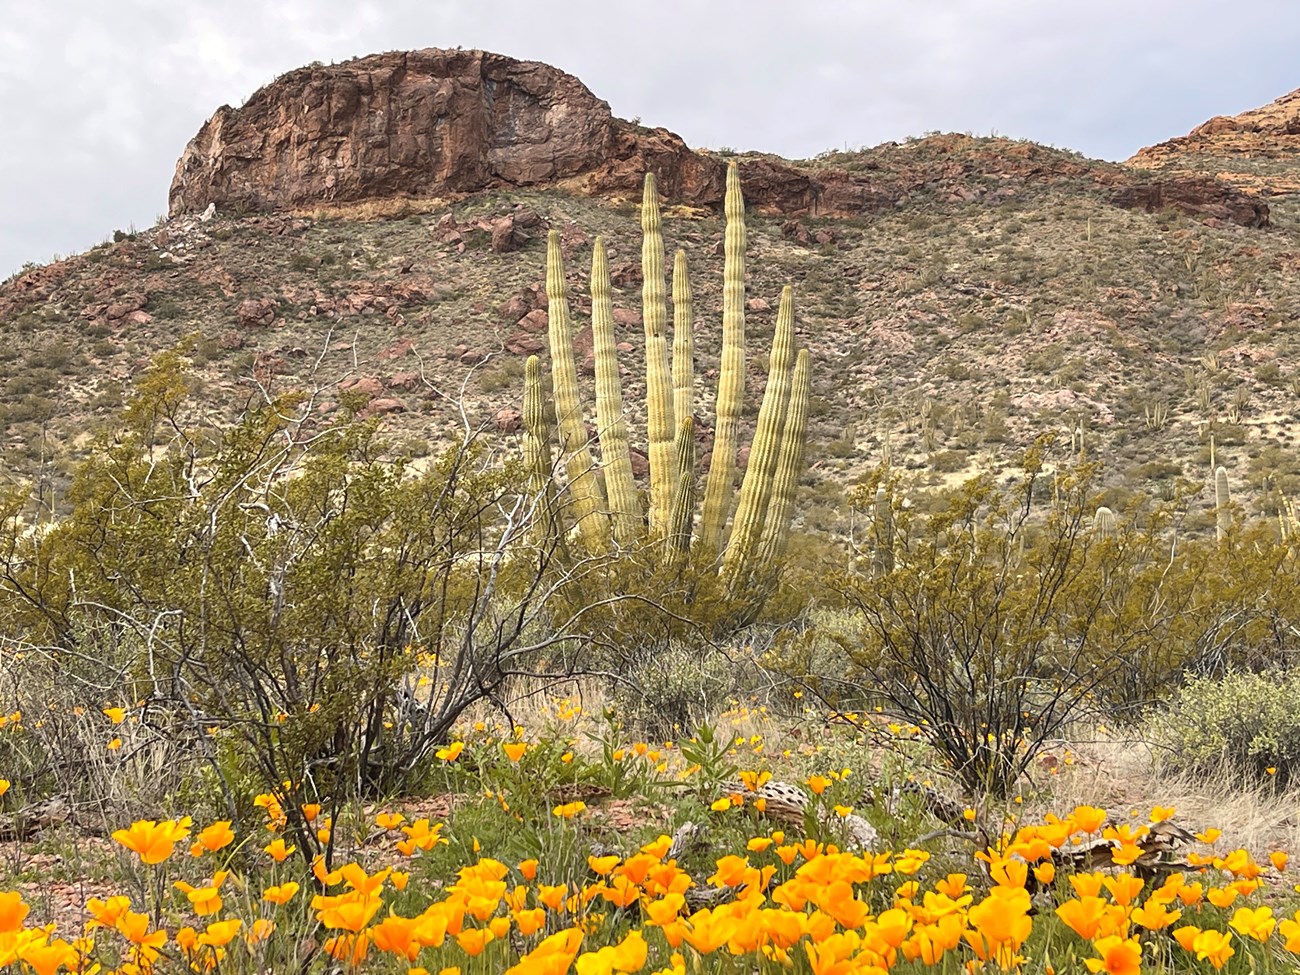 Bright orange poppies surround an organ pipe with brown mountains in the background.